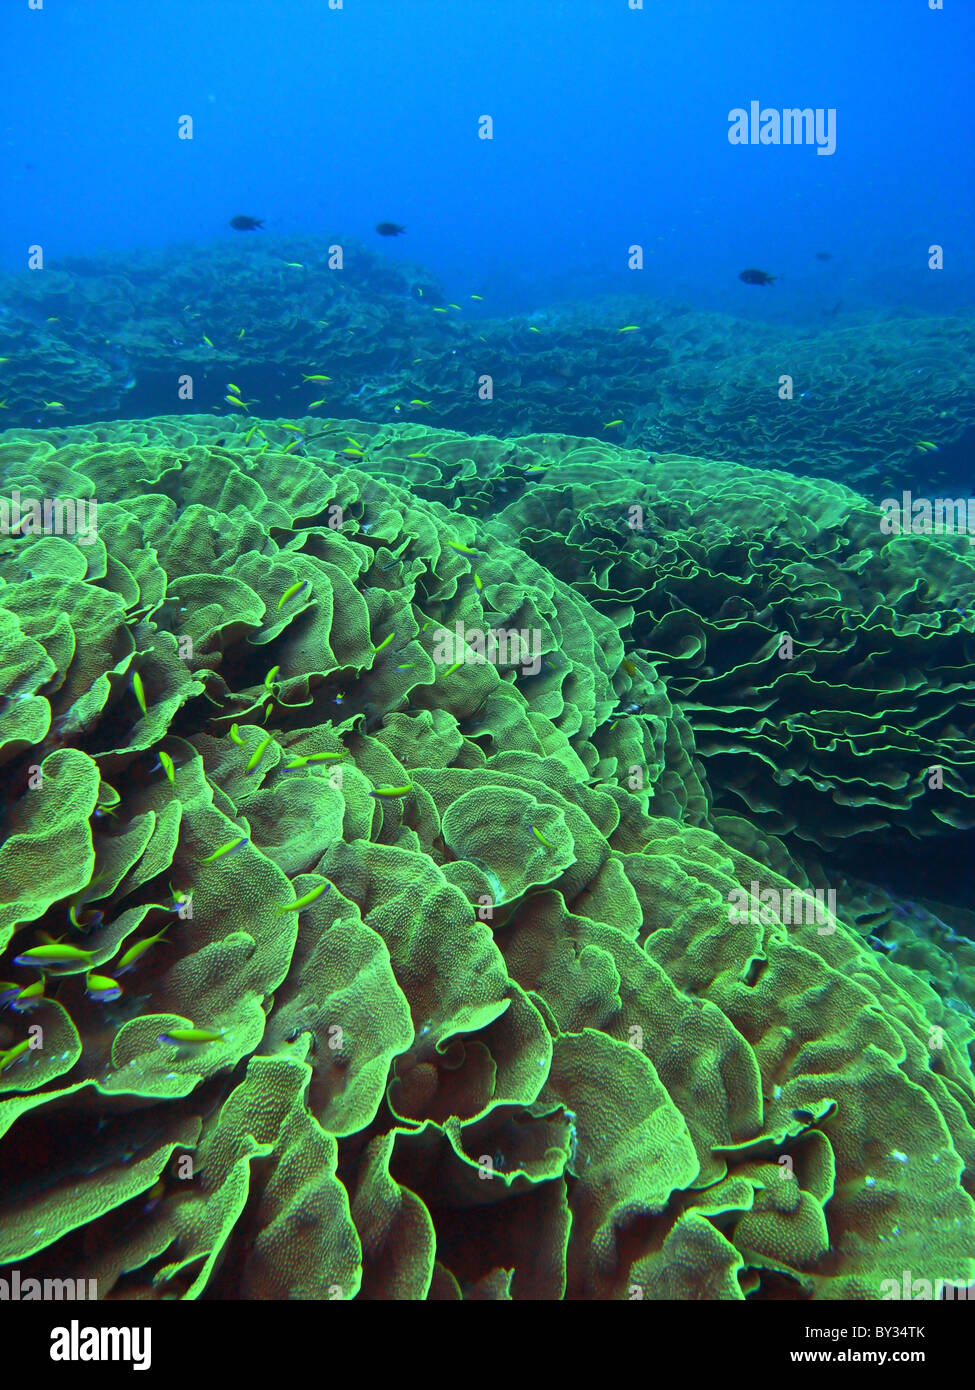 Fields of Turbinaria reniformis coral at the Cabbage Patch, Cocos Keeling lagoon, Indian Ocean Stock Photo